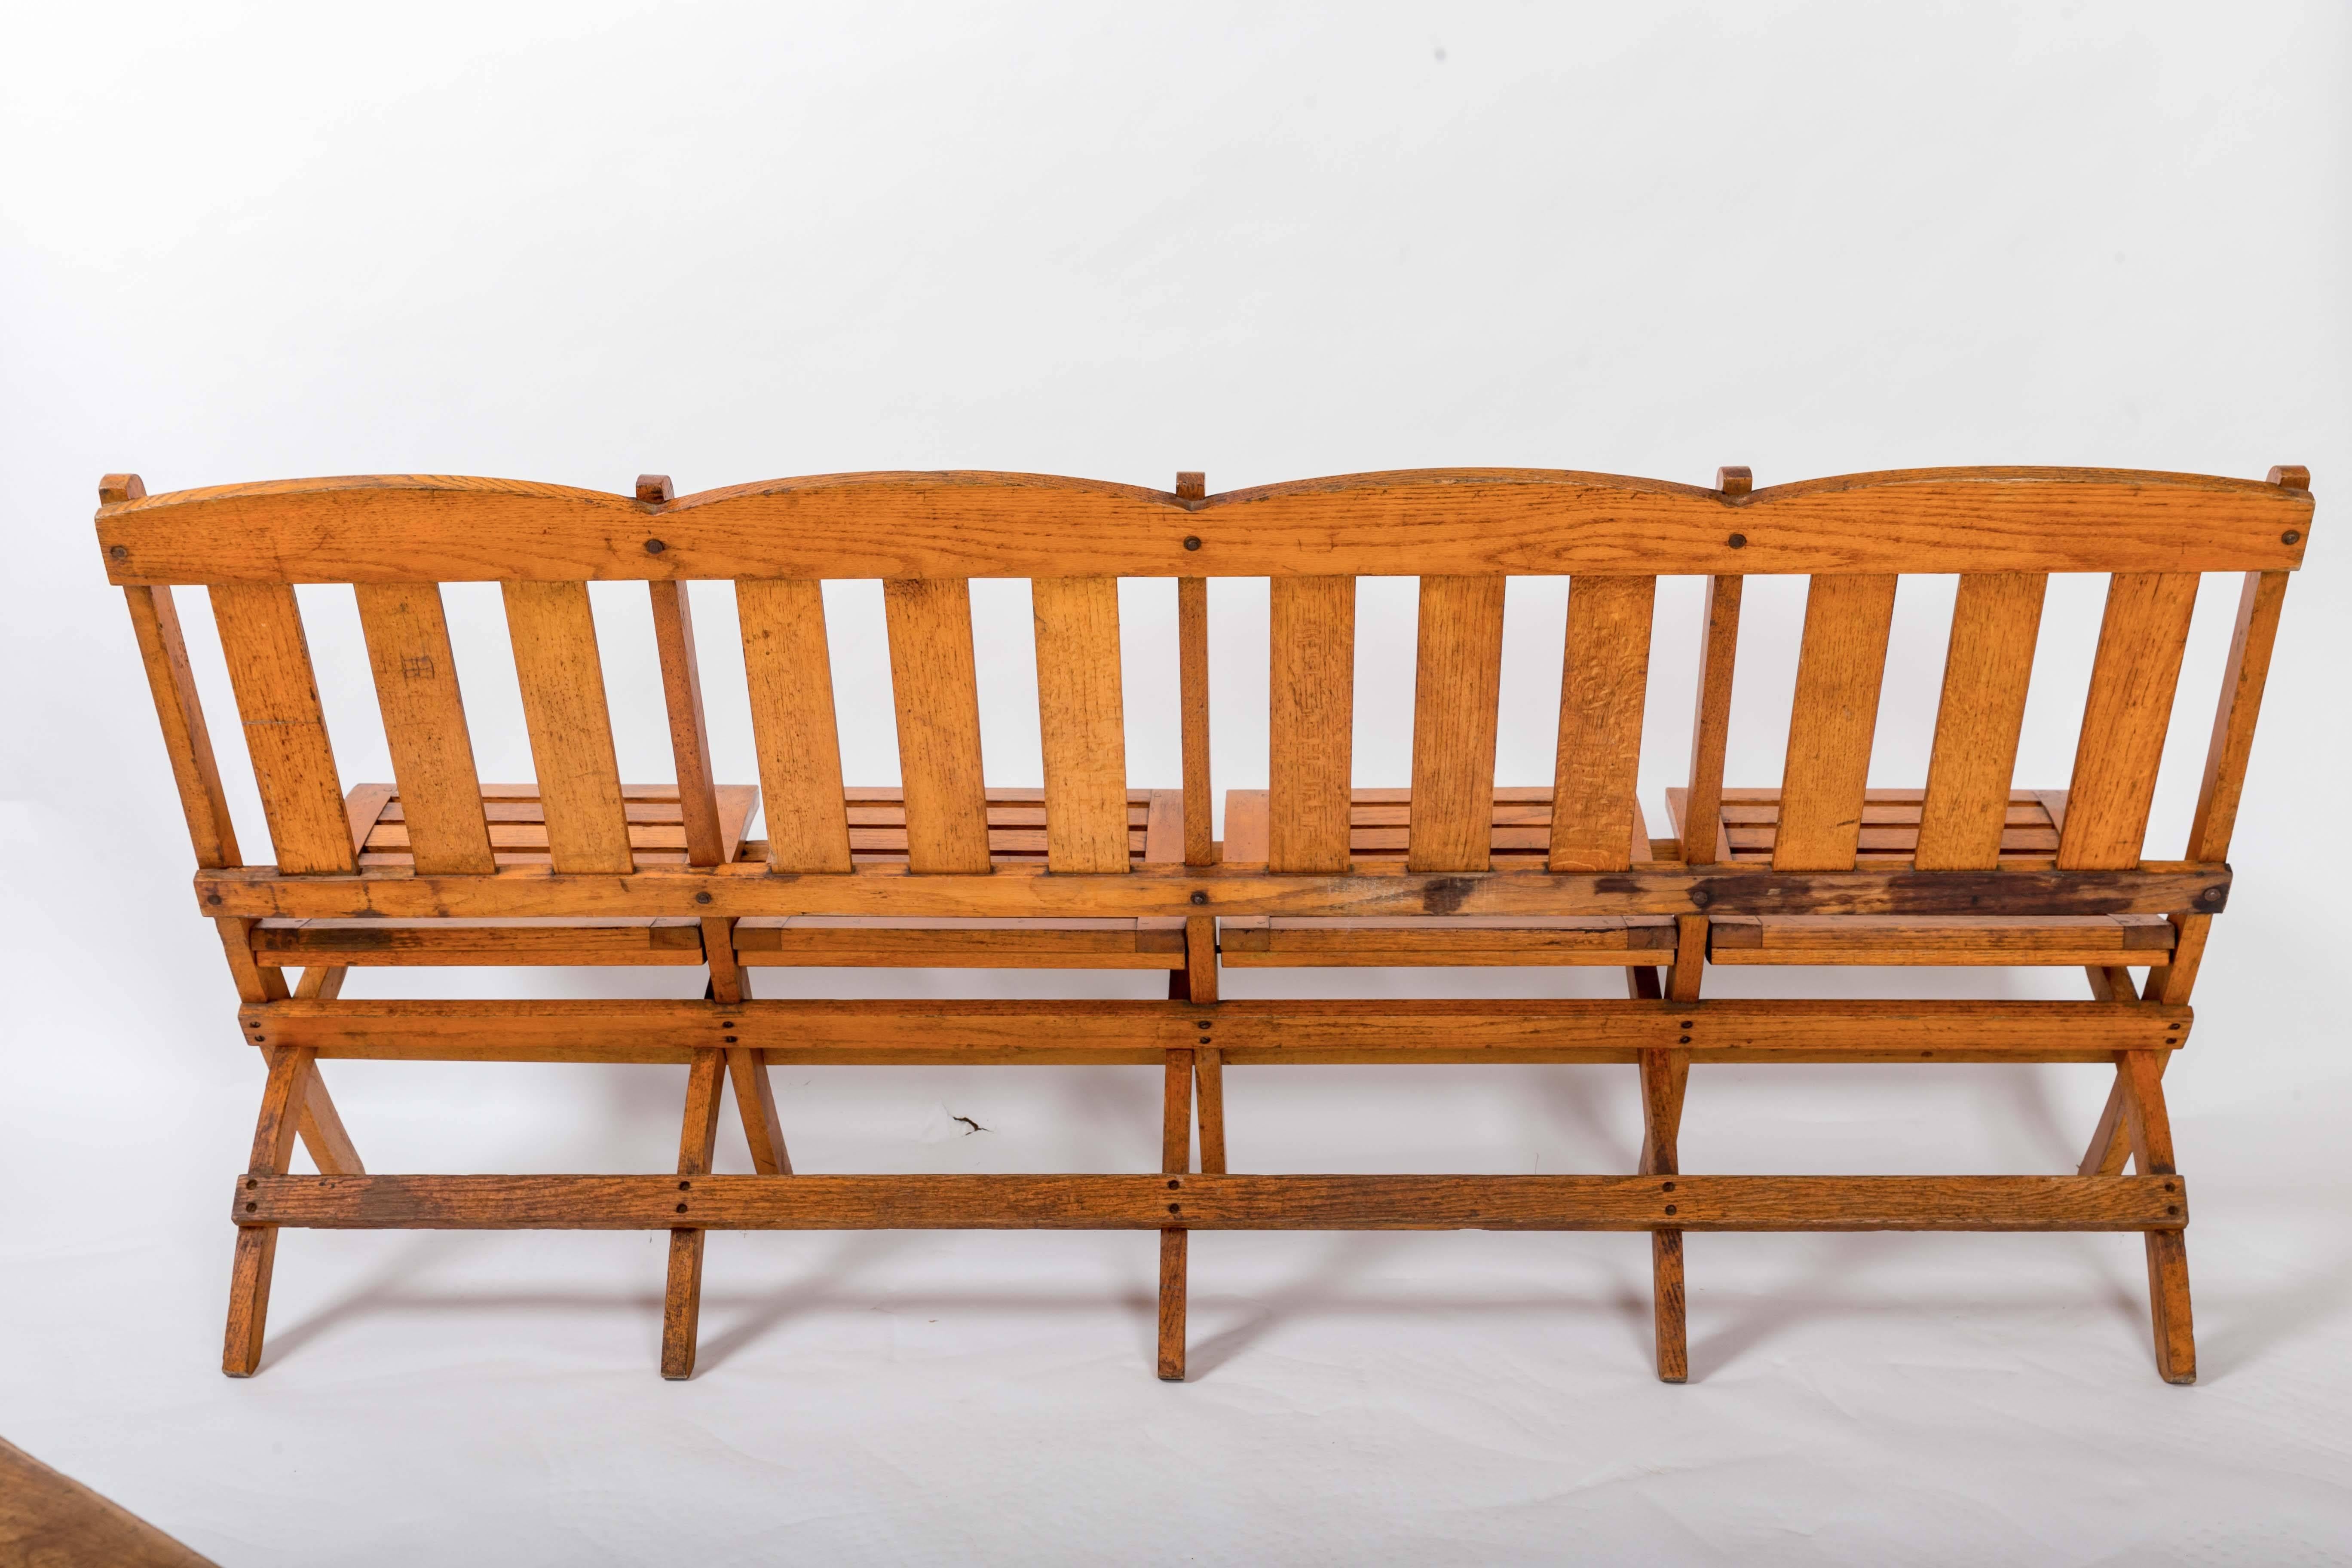 1920s Four-Seat Folding Railroad Bench, Capetown South Africa, circa 1920s For Sale 1